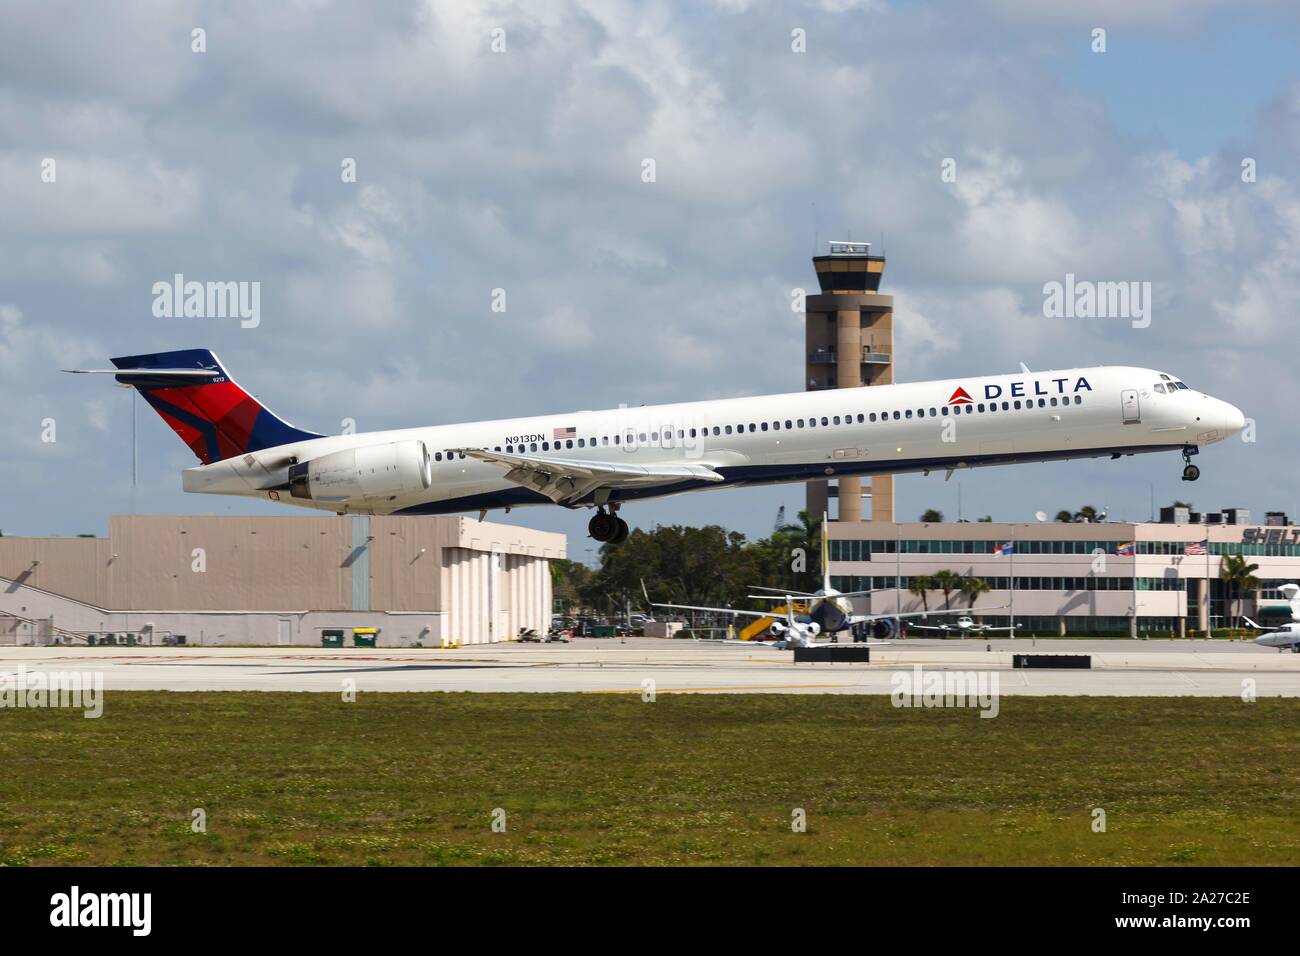 Fort Lauderdale, USA - 06. April 2019: Delta Air Lines McDonnell Douglas MD-90 airplane at Fort Lauderdale Hollywood international airport (FTL) in th United States. | usage worldwide Stock Photo